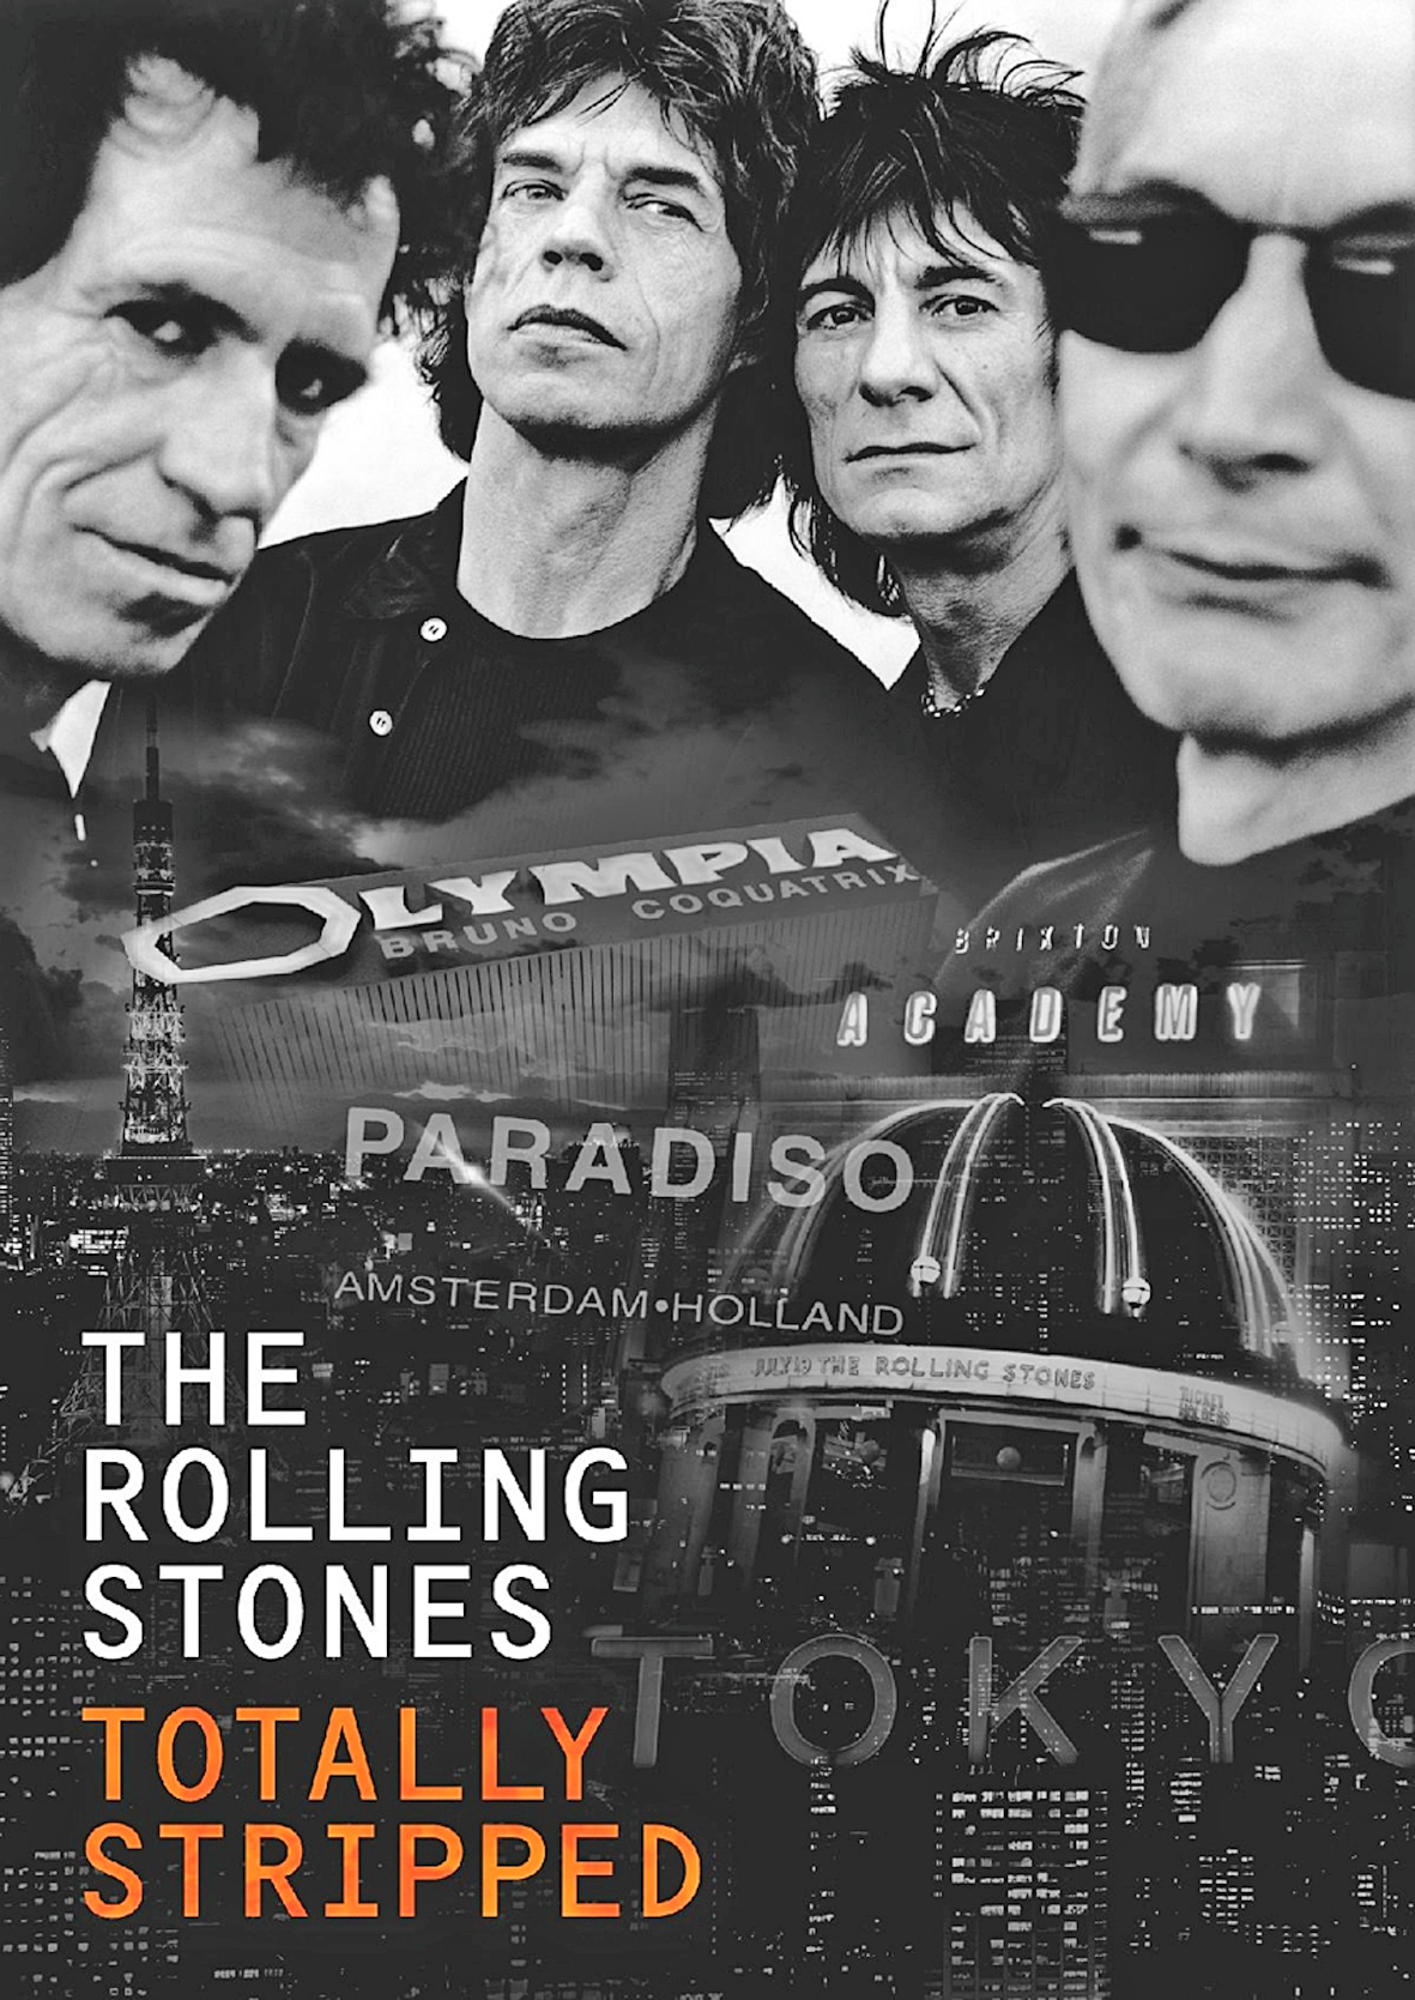 The Rolling - Stones - Stripped (DVD) Totally